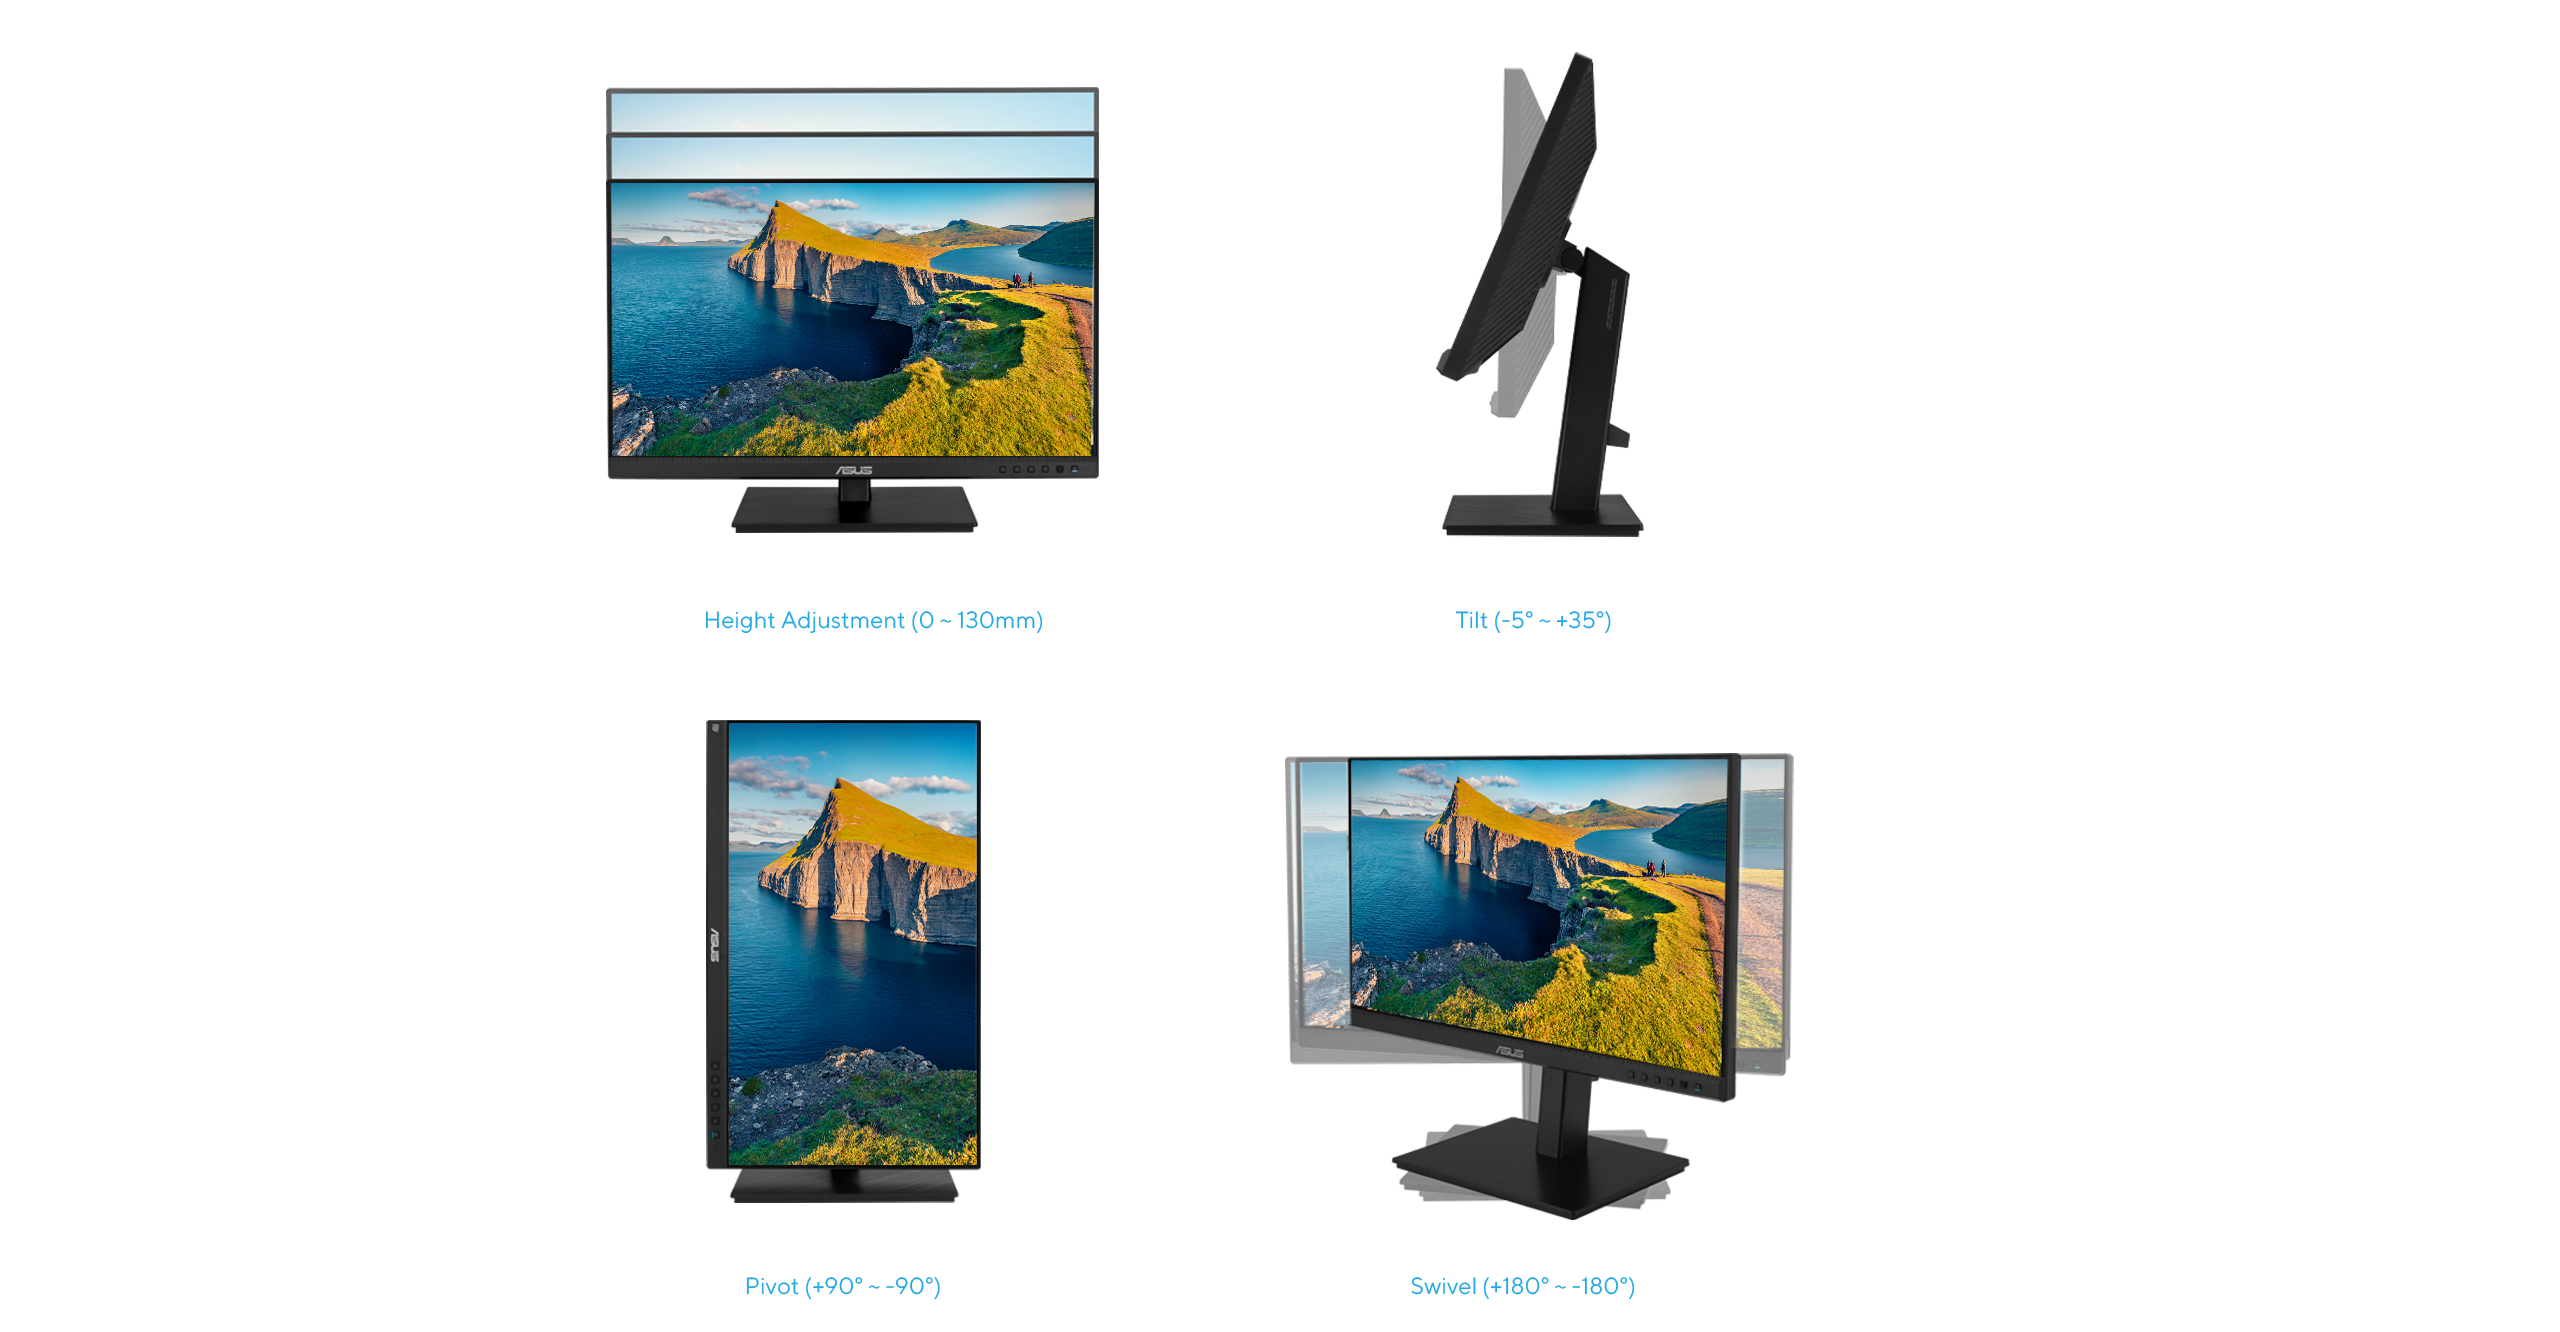 Because its ergonomic stand offers tilt, swivel, pivot, and height adjustments, BE24ECSBT provides a superb range of viewing options for increased productivity and comfort.